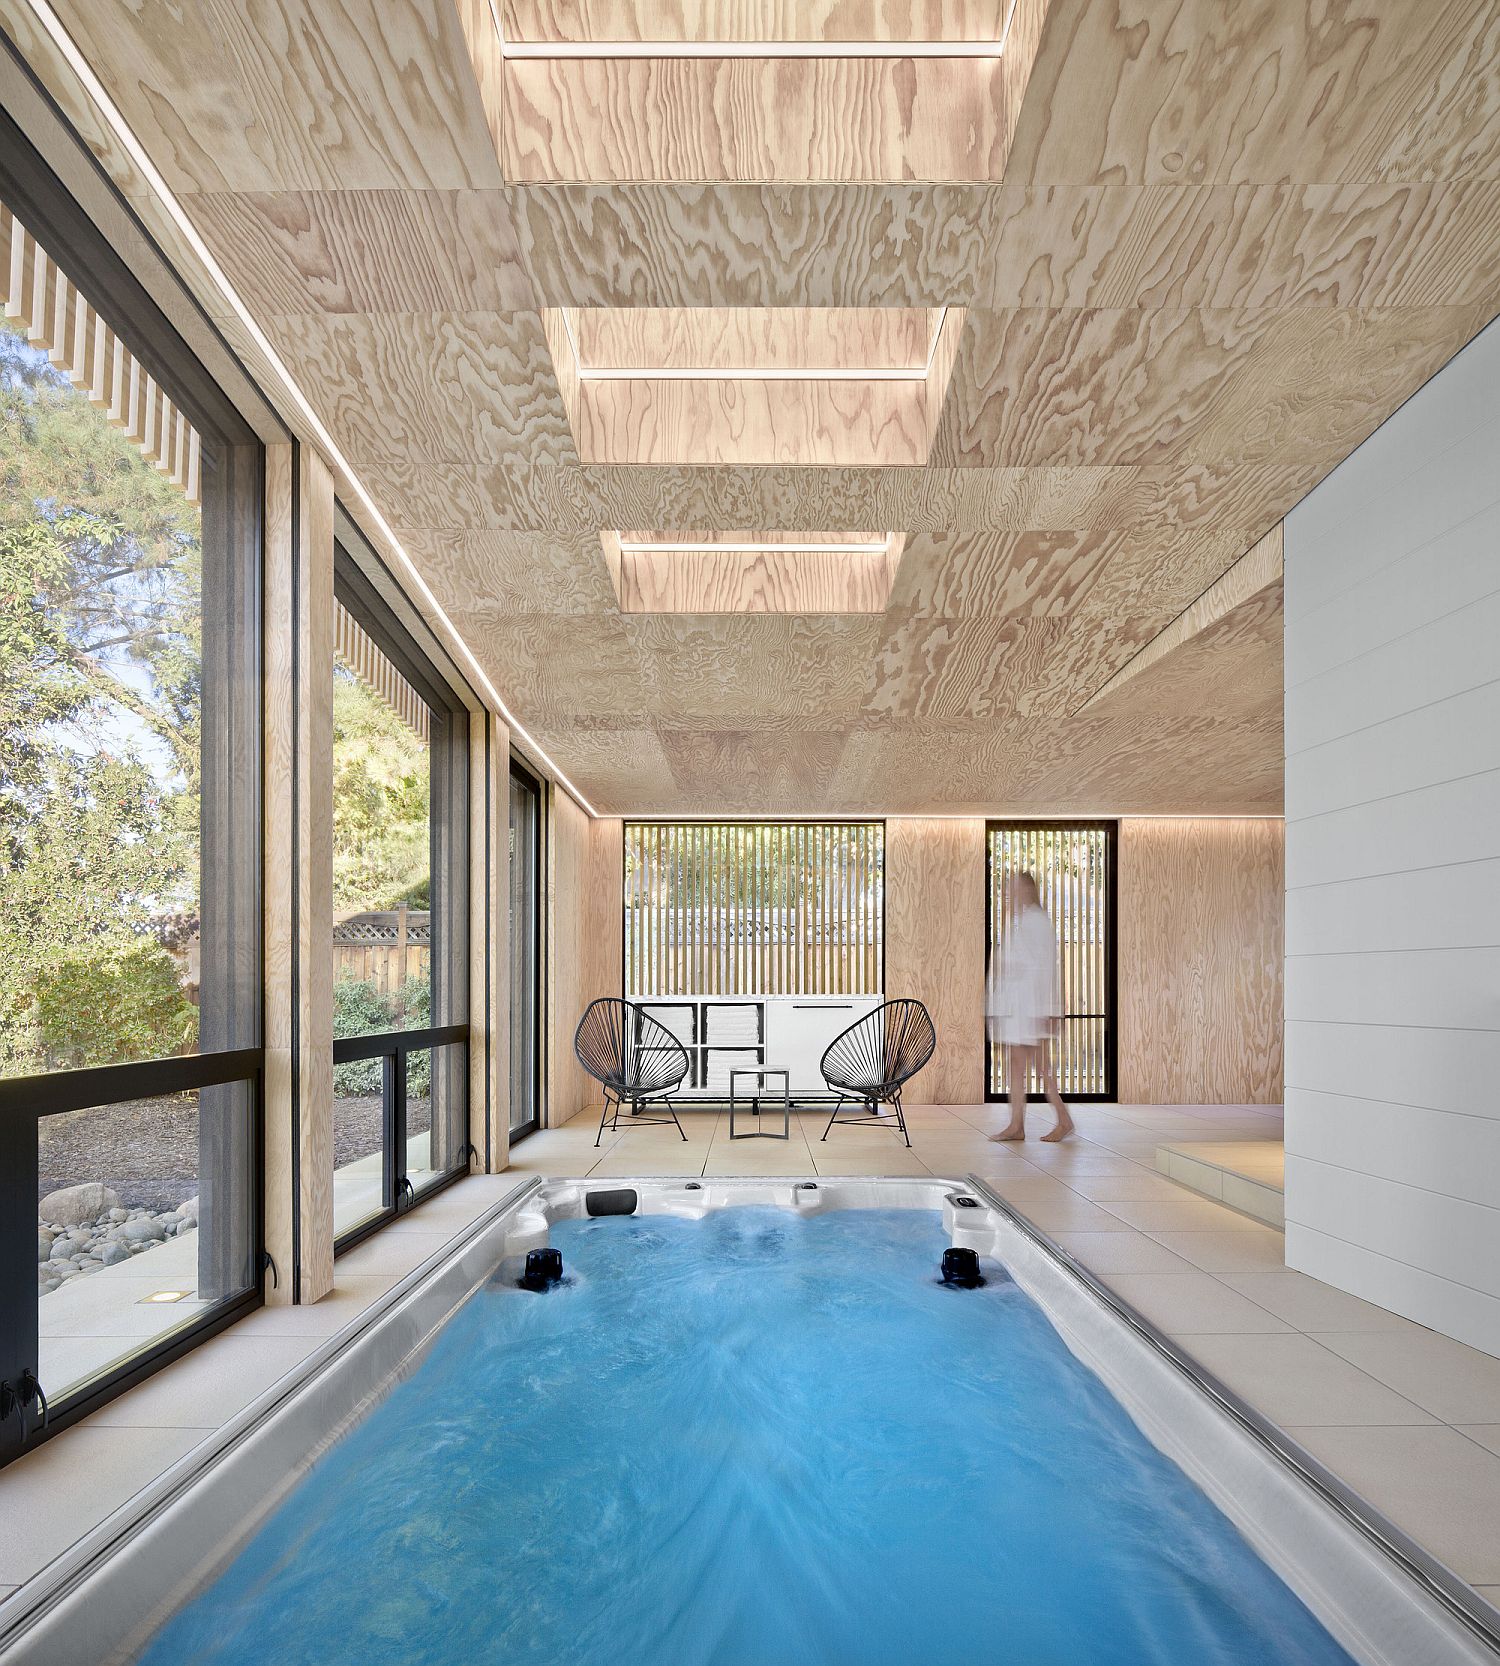 Skylights and operable rainscreens add another layer of ventilation to the stunning contemporary pool hnouse inh Los Altos